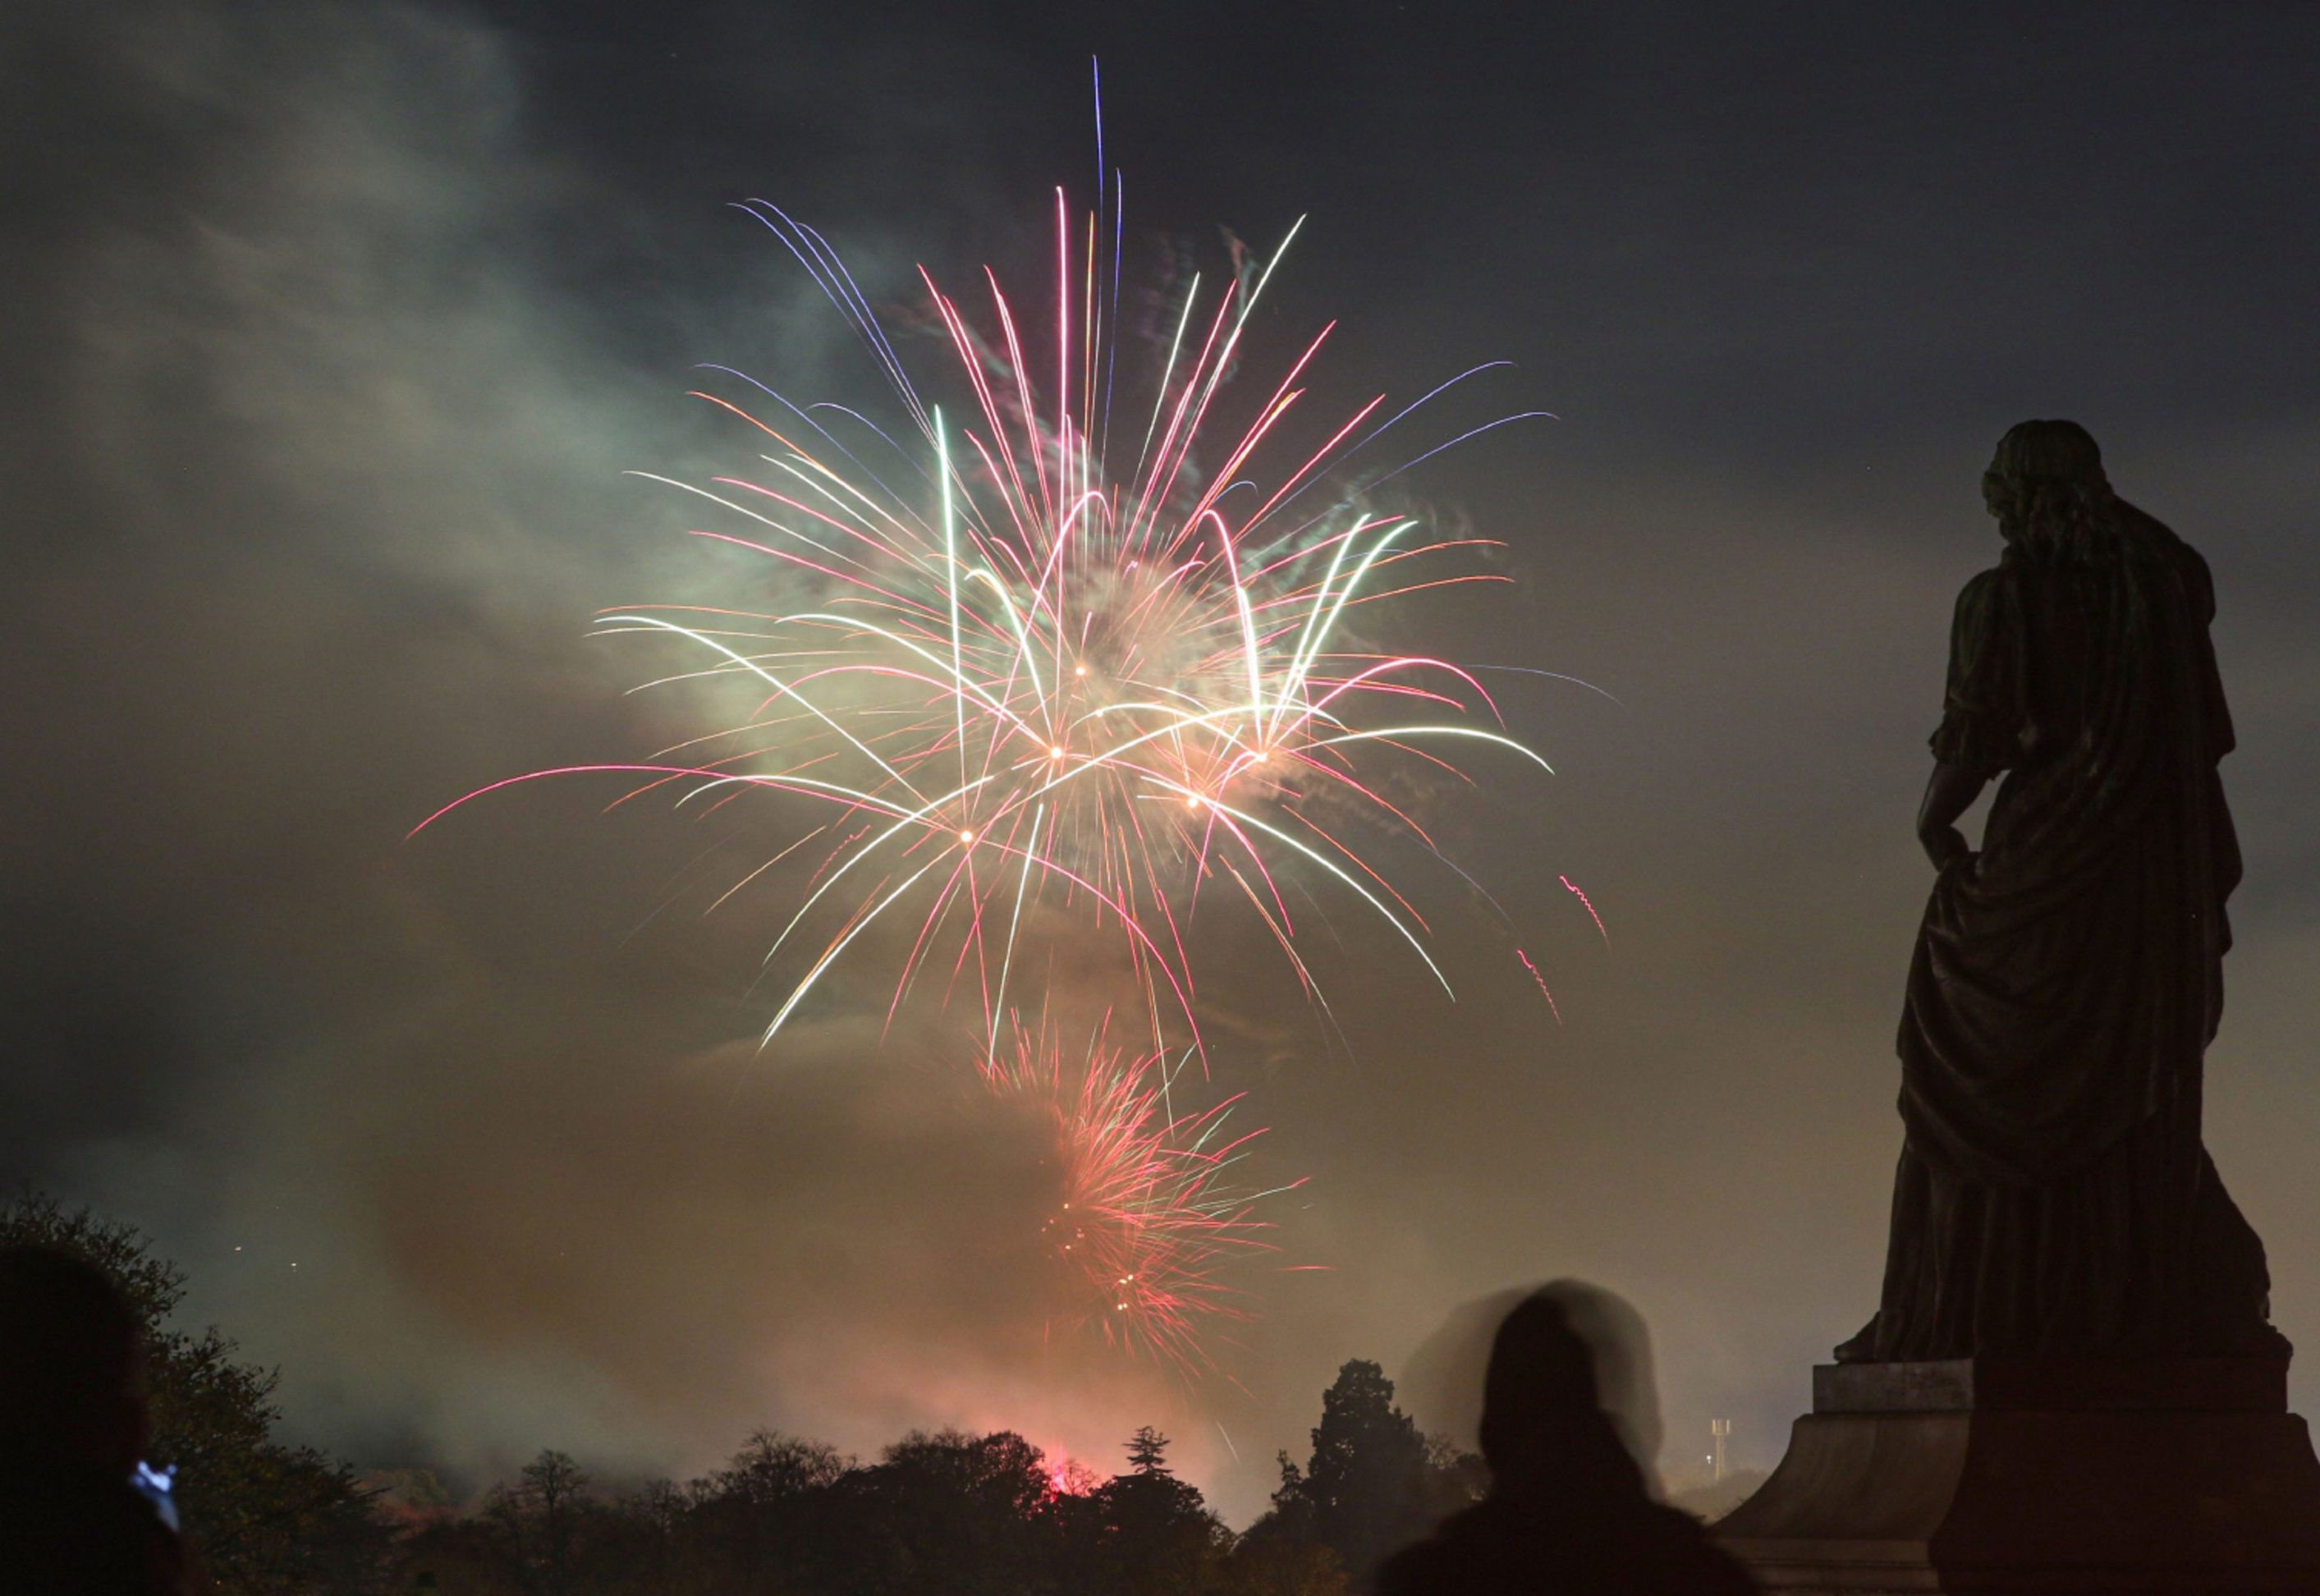 Fireworks at Bught Park, as seen from Inverness Castle with the statue of Flora MacDonald in the foreground.